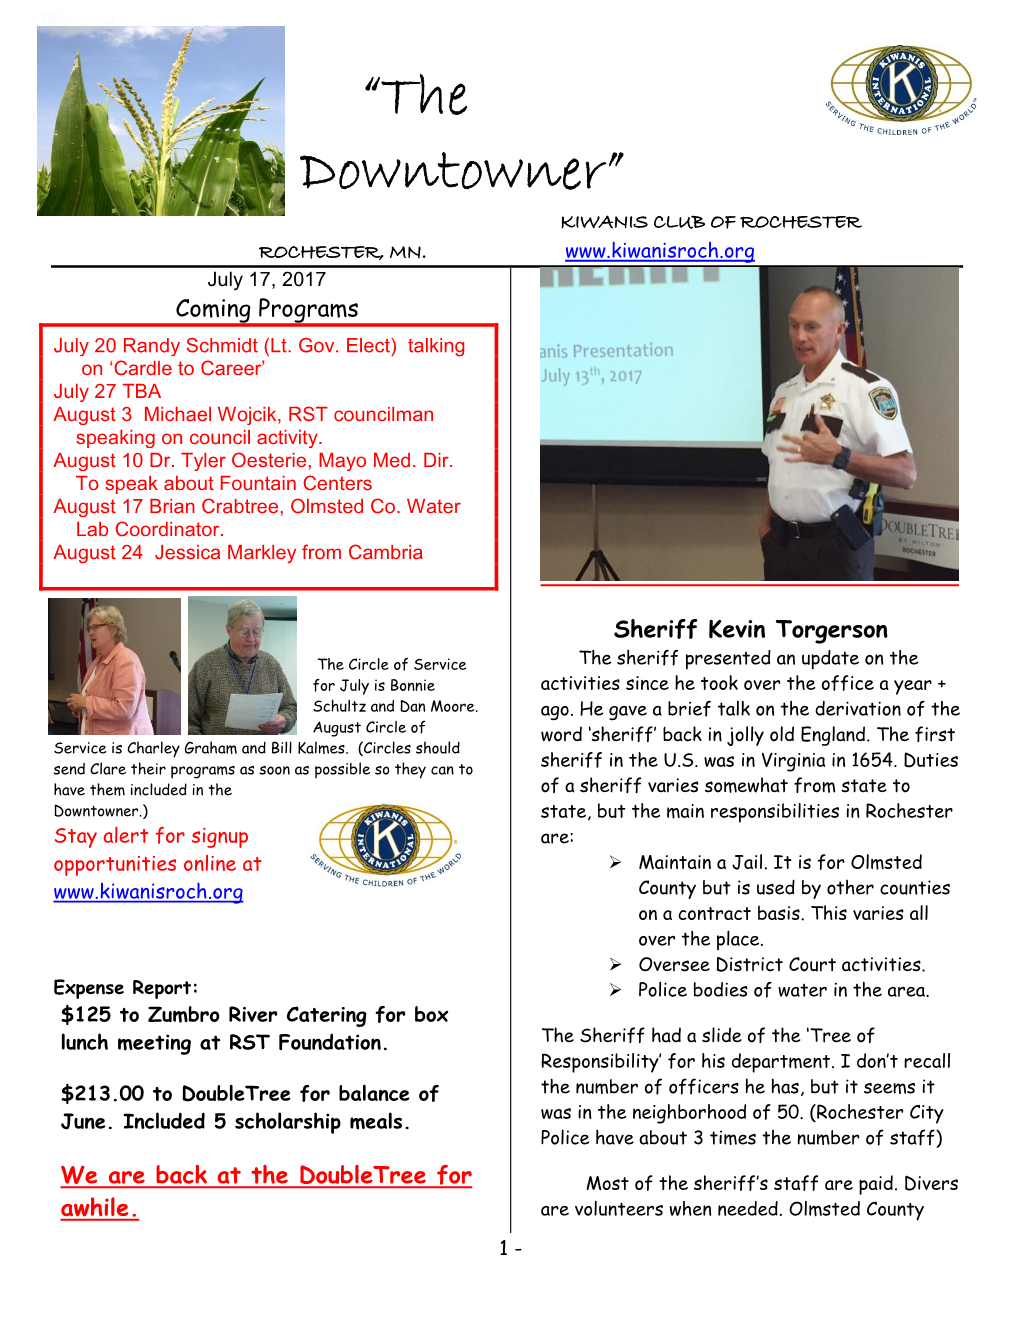 “The Downtowner” KIWANIS CLUB of ROCHESTER ROCHESTER, MN